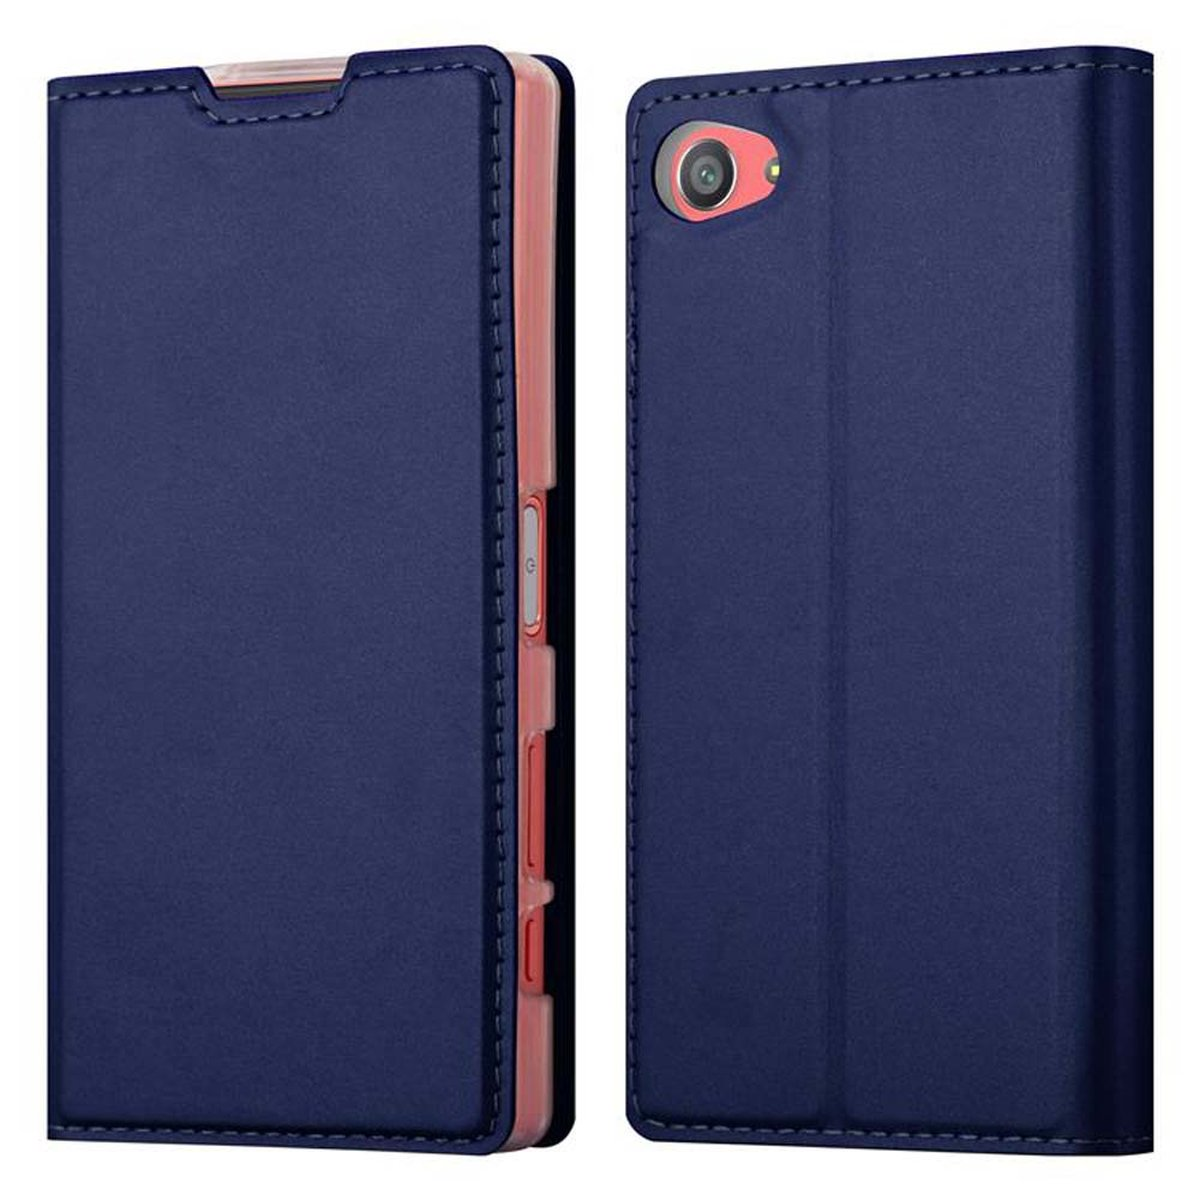 Classy Book Bookcover, Style, Xperia Handyhülle Sony, Z5 CADORABO CLASSY BLAU DUNKEL COMPACT,